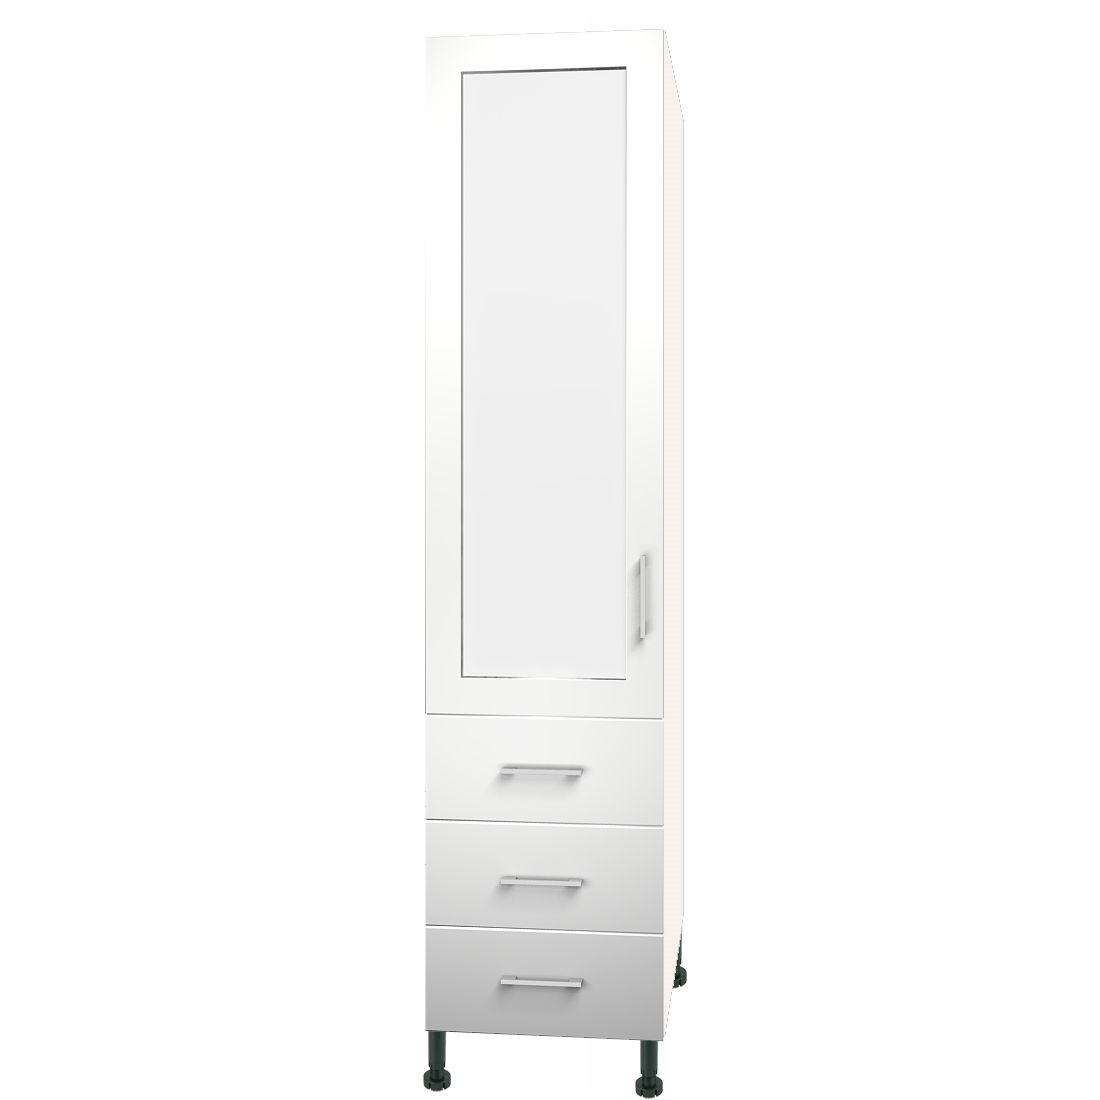 Single Wardrobe Mirrored Door 3 Drawers – Meon Acrylic – Paramount Bathrooms In Single White Wardrobes With Drawers (View 9 of 15)